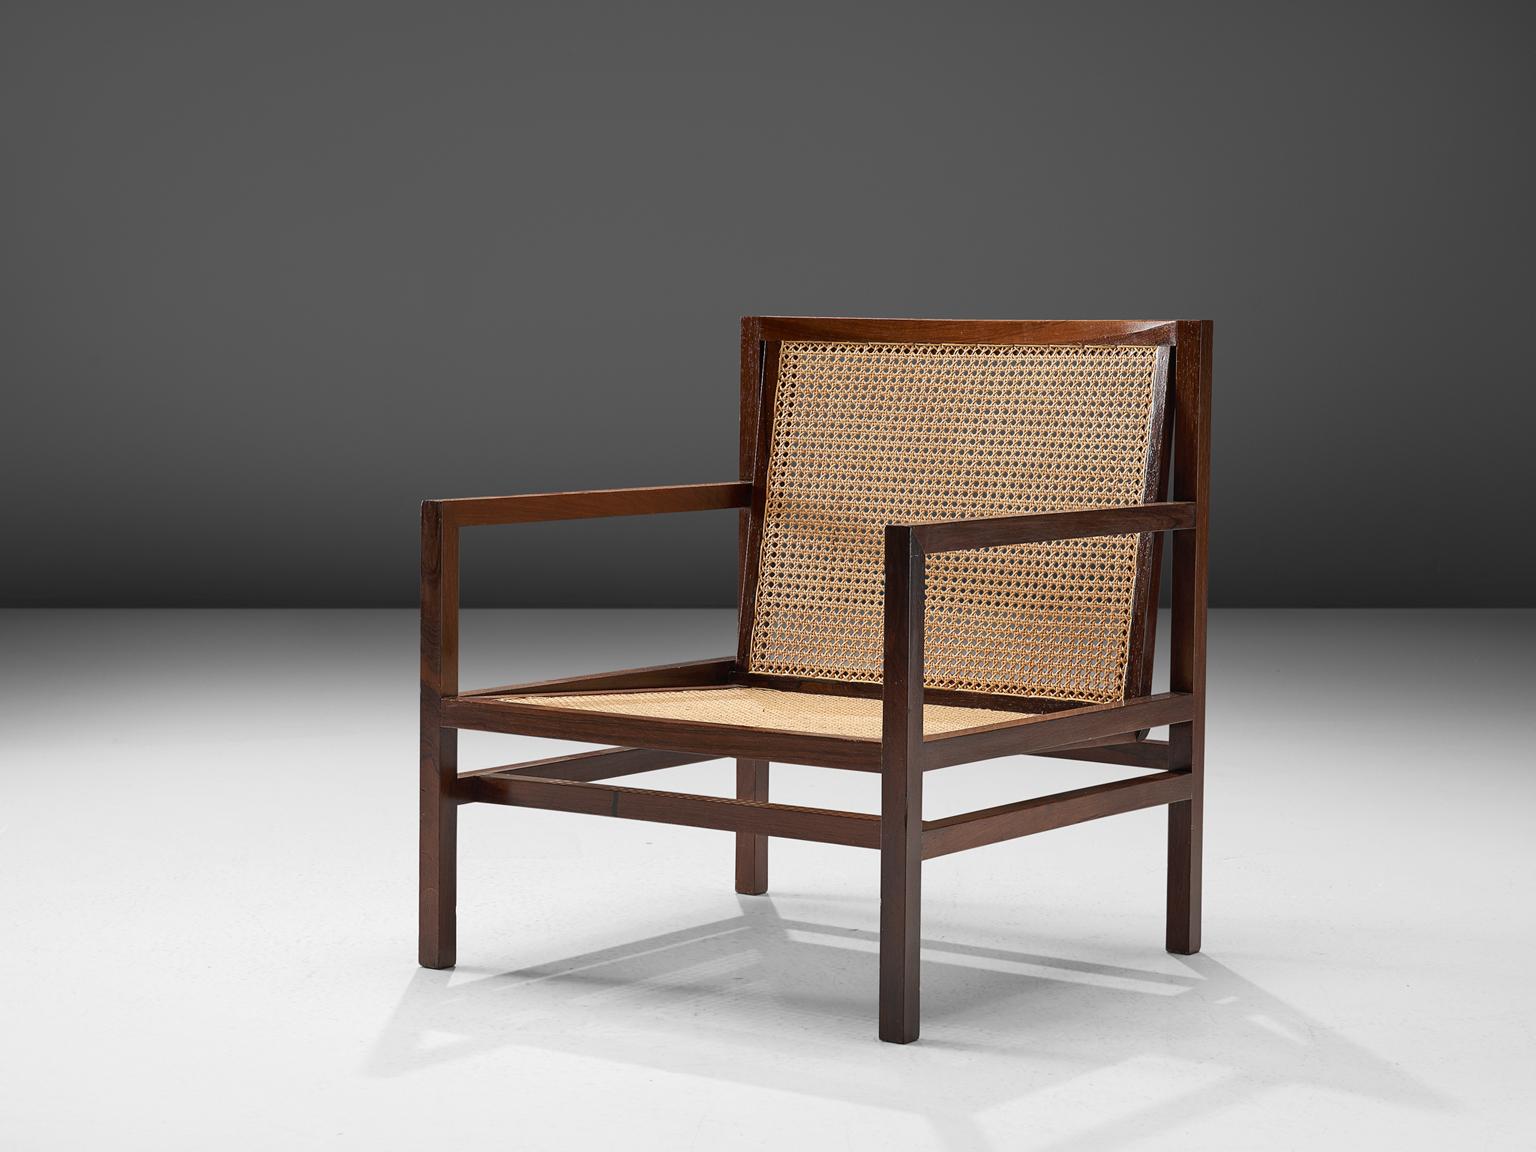 Joaquim Tenreiro, armchair, rosewood and cane, Brazil, 1958

This lounge chair is designed by the Brazilian master designer Joaquim Tenreiro. This chair designed circa 1958 has typical traits of the design by Tenreiro. First of all the use of